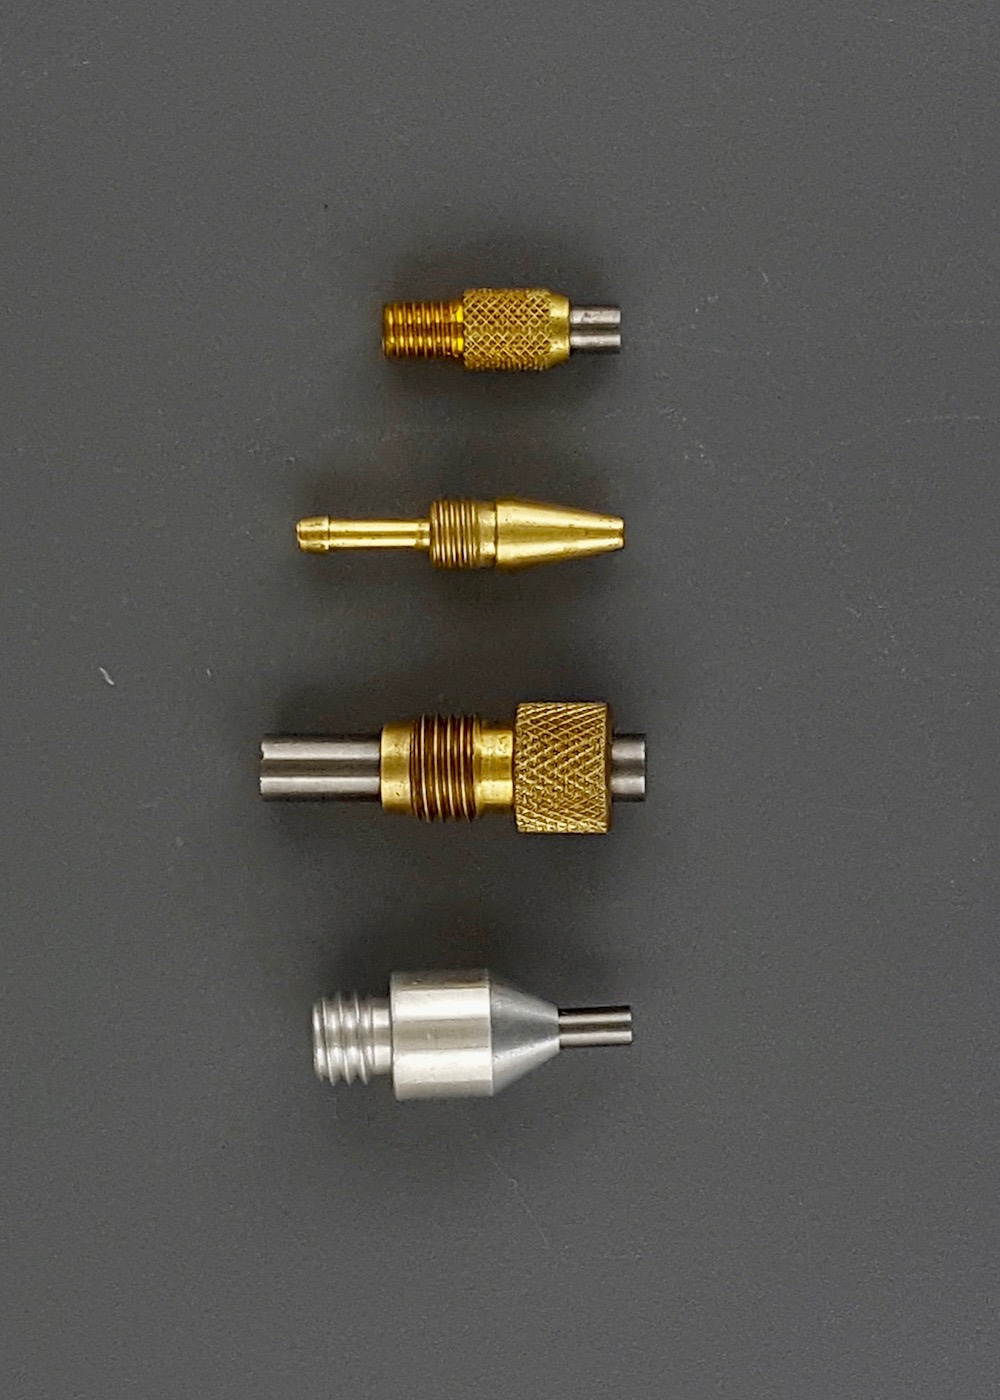 Crystal Mark Manufactures Nozzles using Tungsten Carbide, Sapphire, or other Specialized Composite Materials